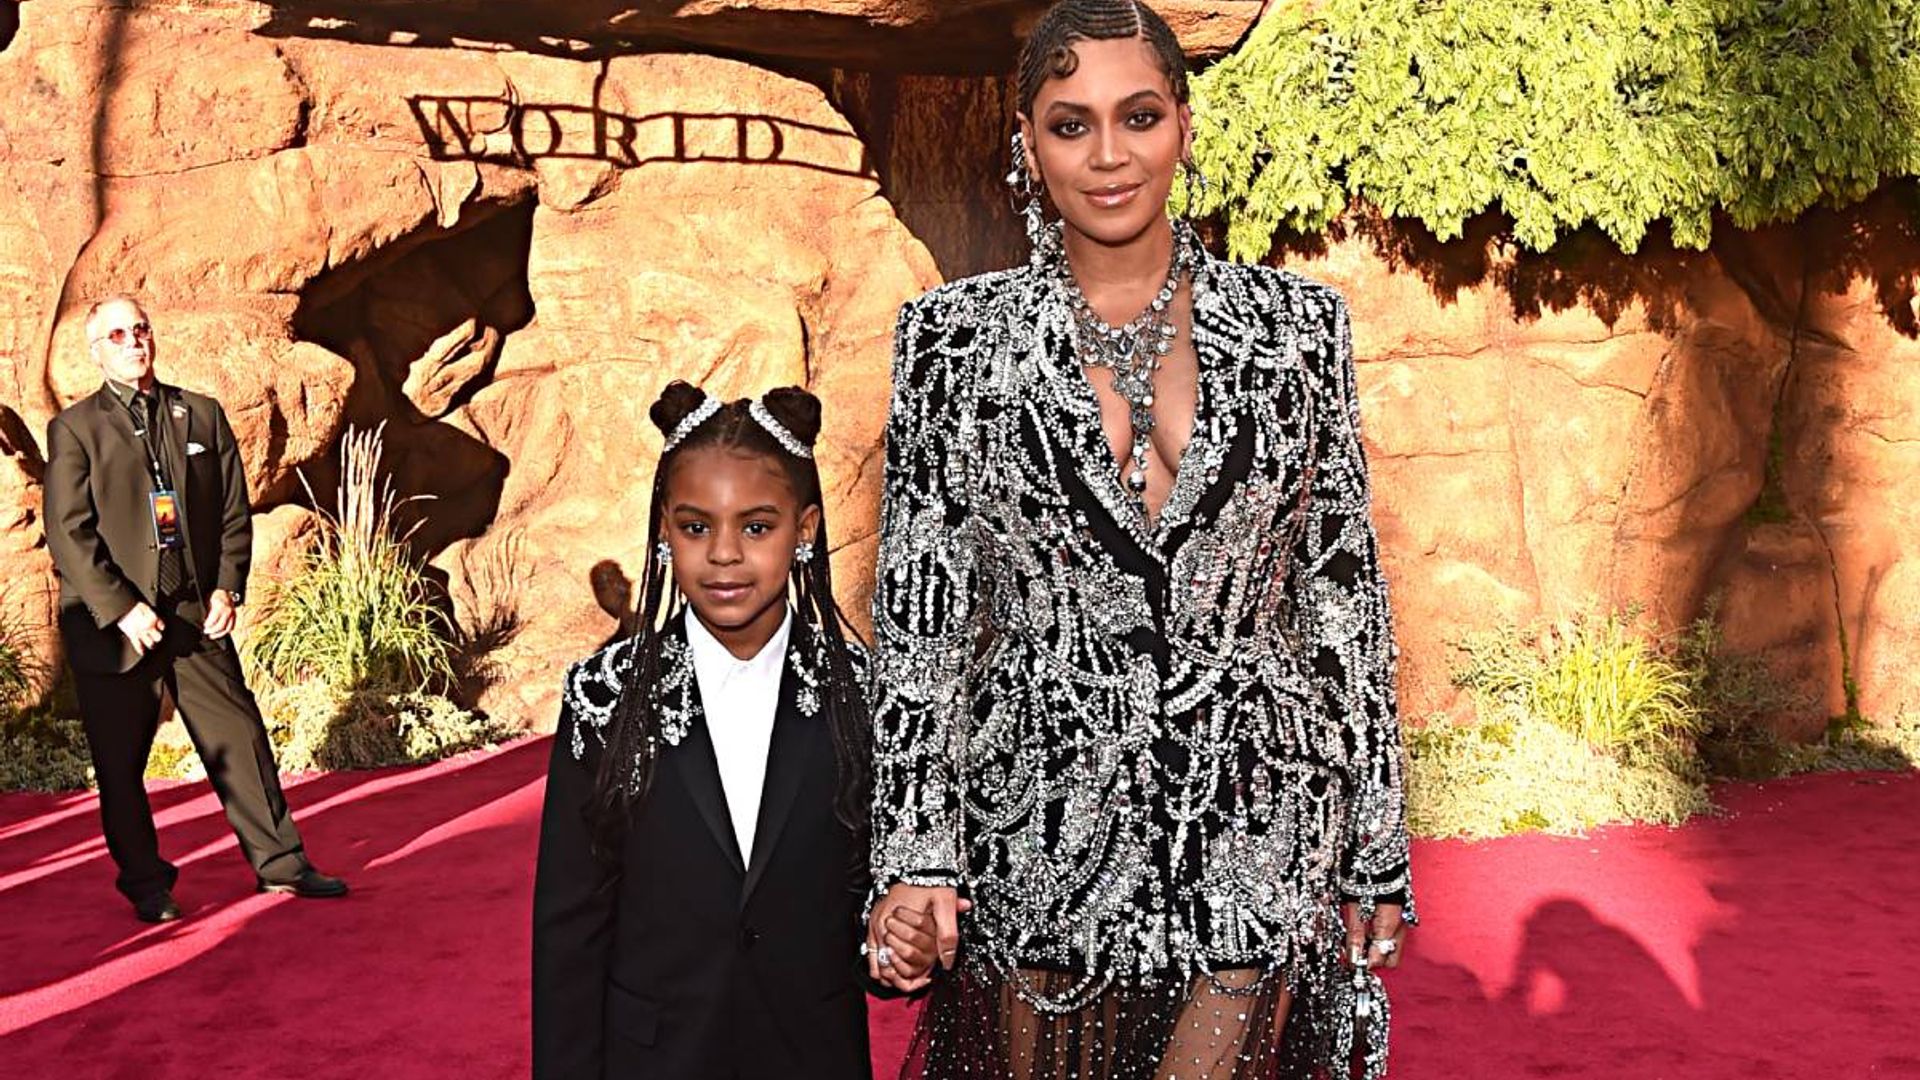 Beyoncé’s daughter Blue Ivy lands her first Grammy - and there’s a special meaning behind it